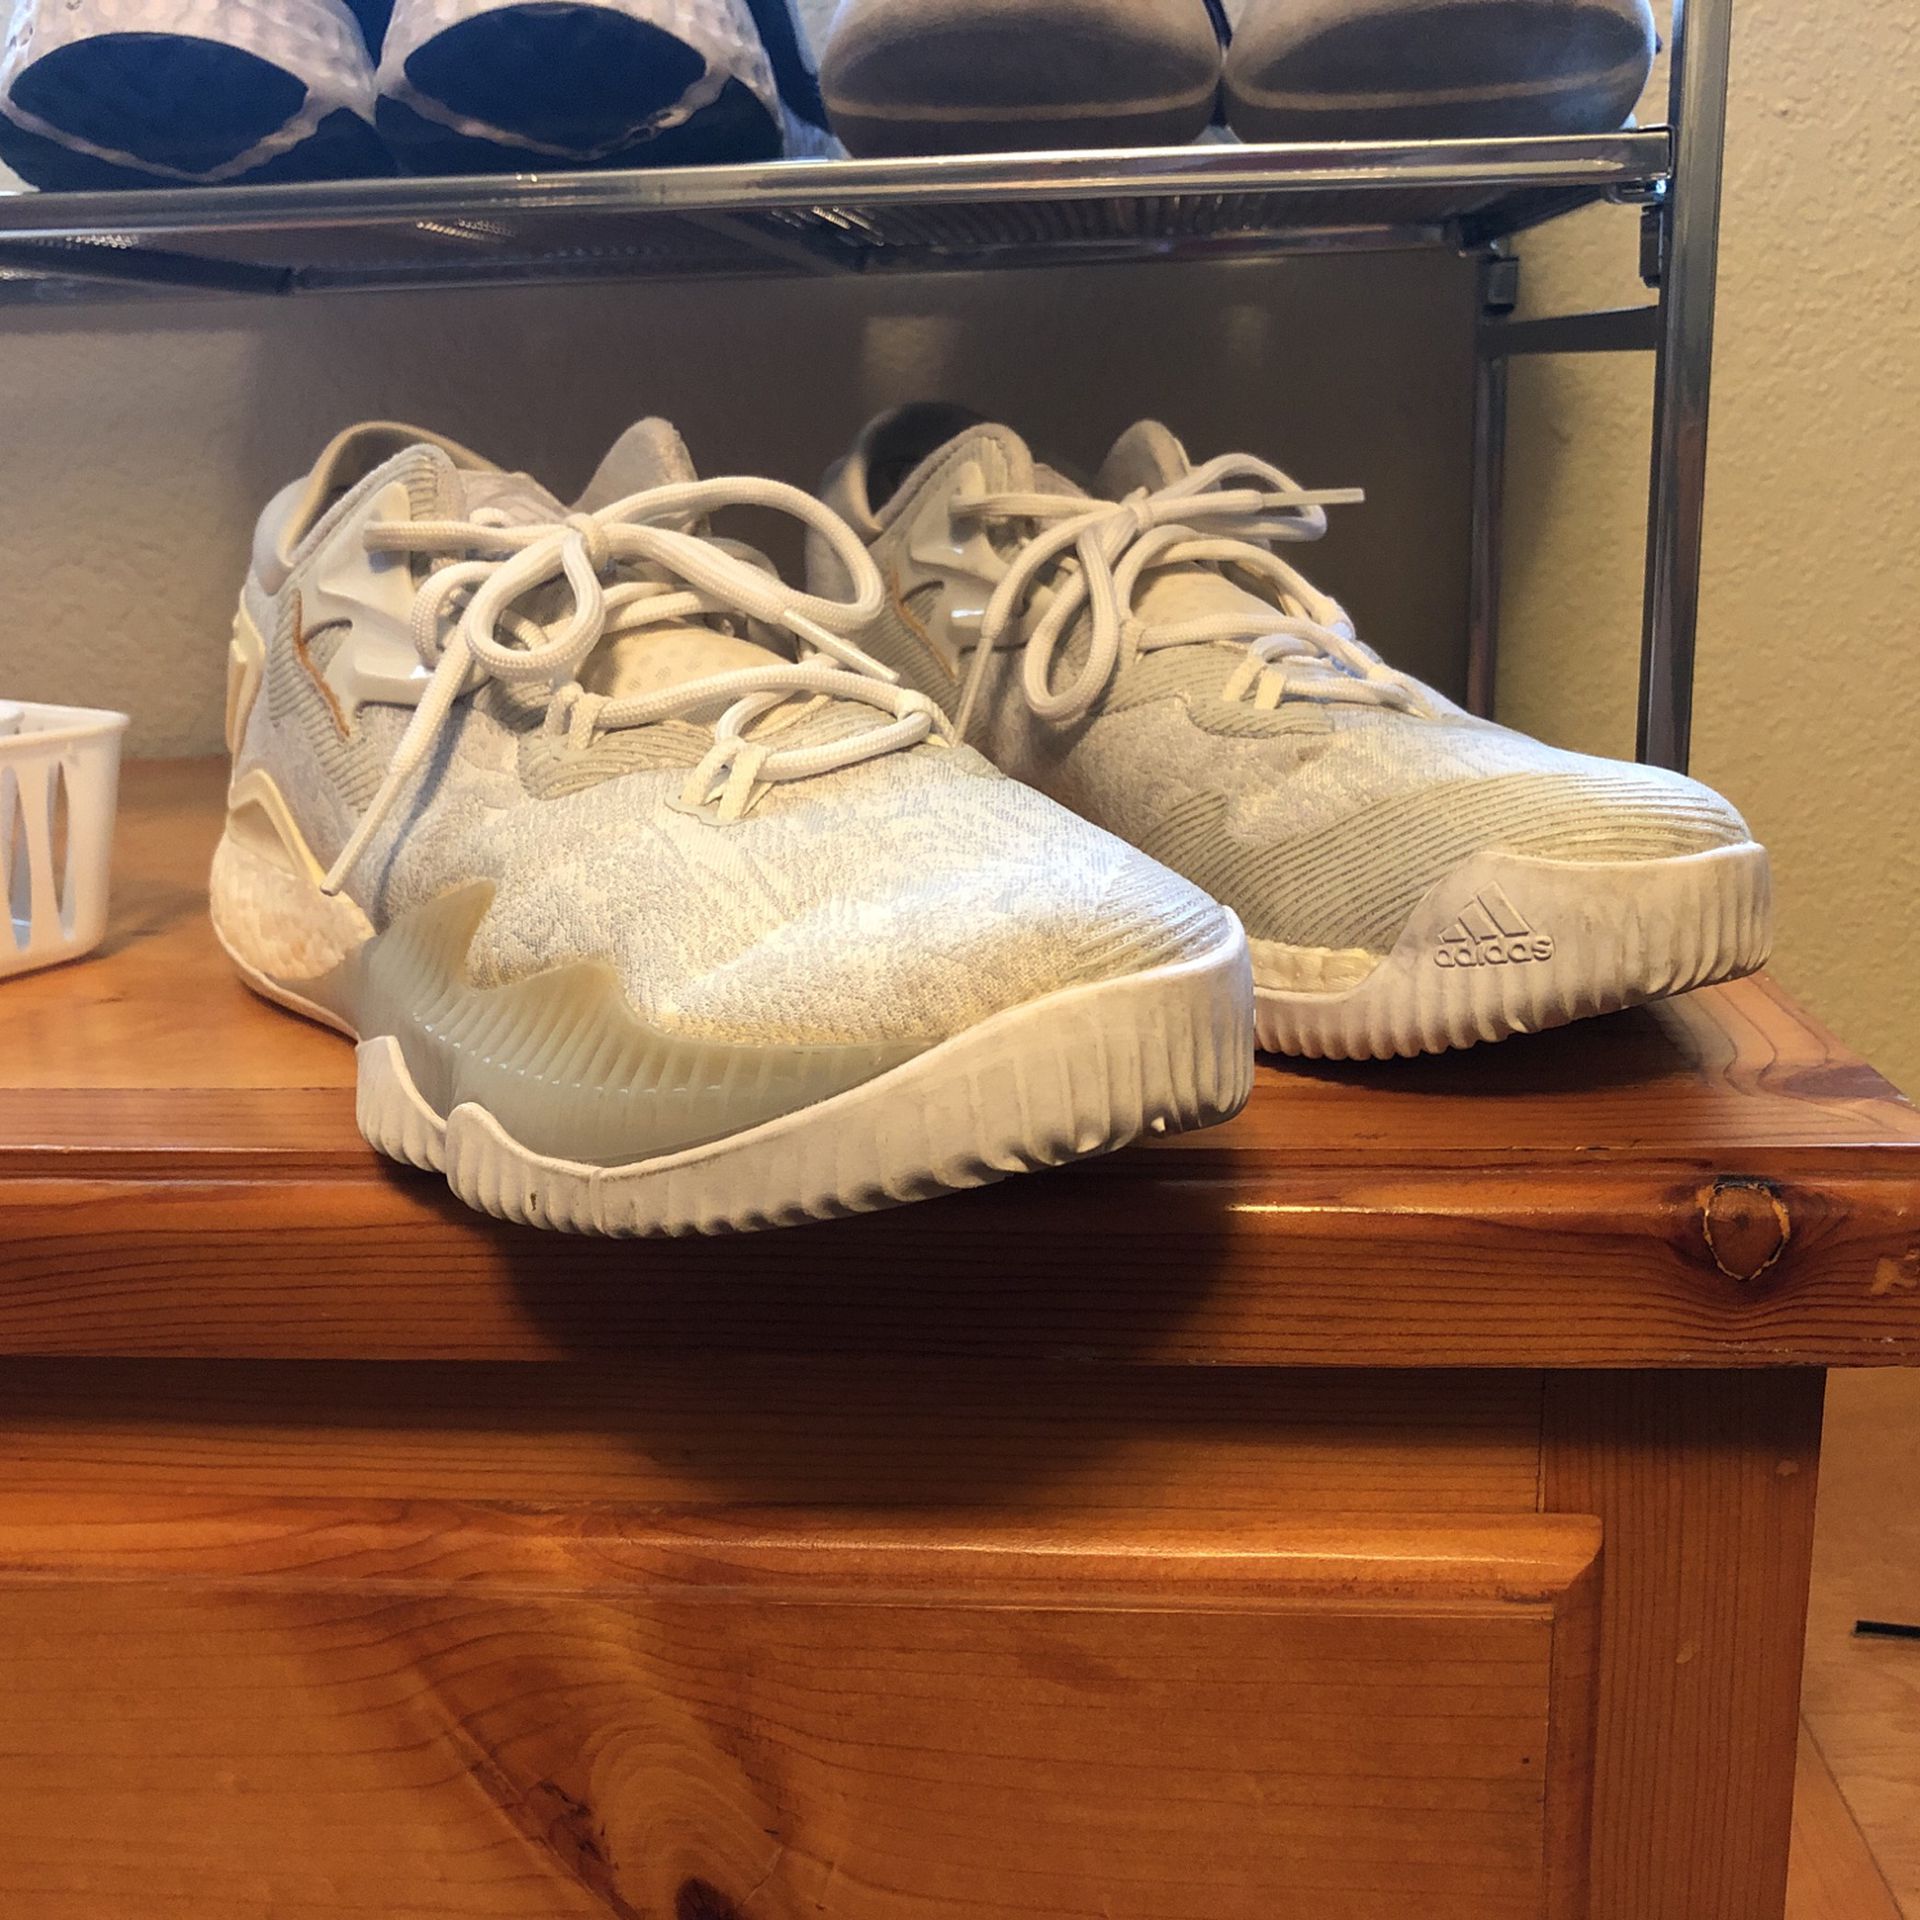 Size Adidas Crazylight Boost 2016 Triple White for Sale in Chino, CA - OfferUp